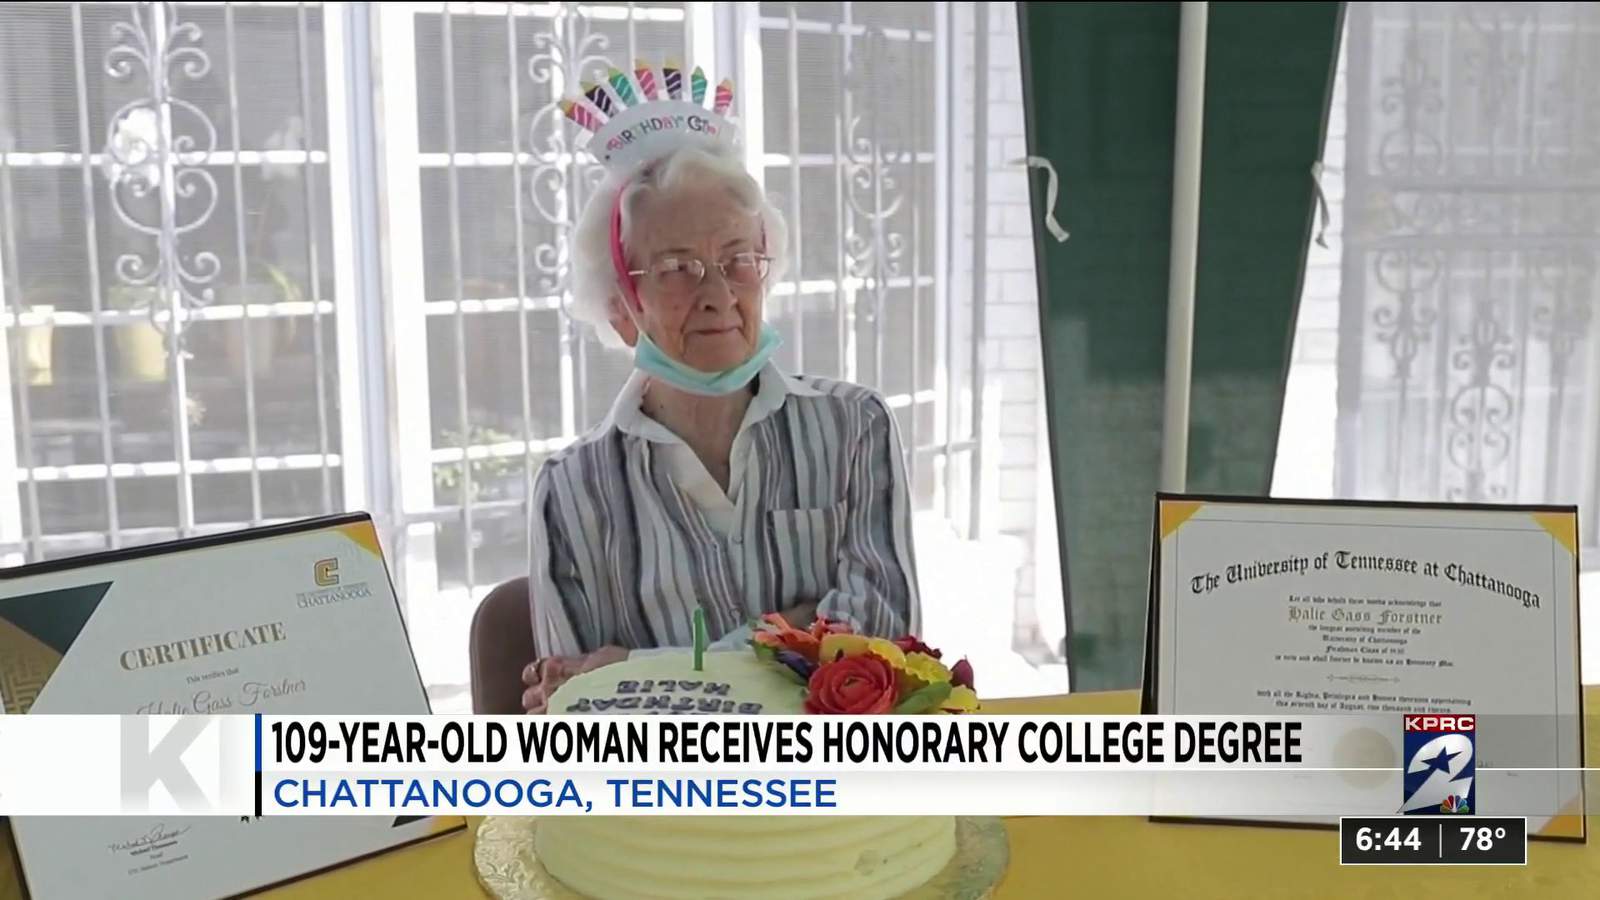 One Good Thing: 109-year-old woman receives honorary degree from University of Tennessee as birthday surprise